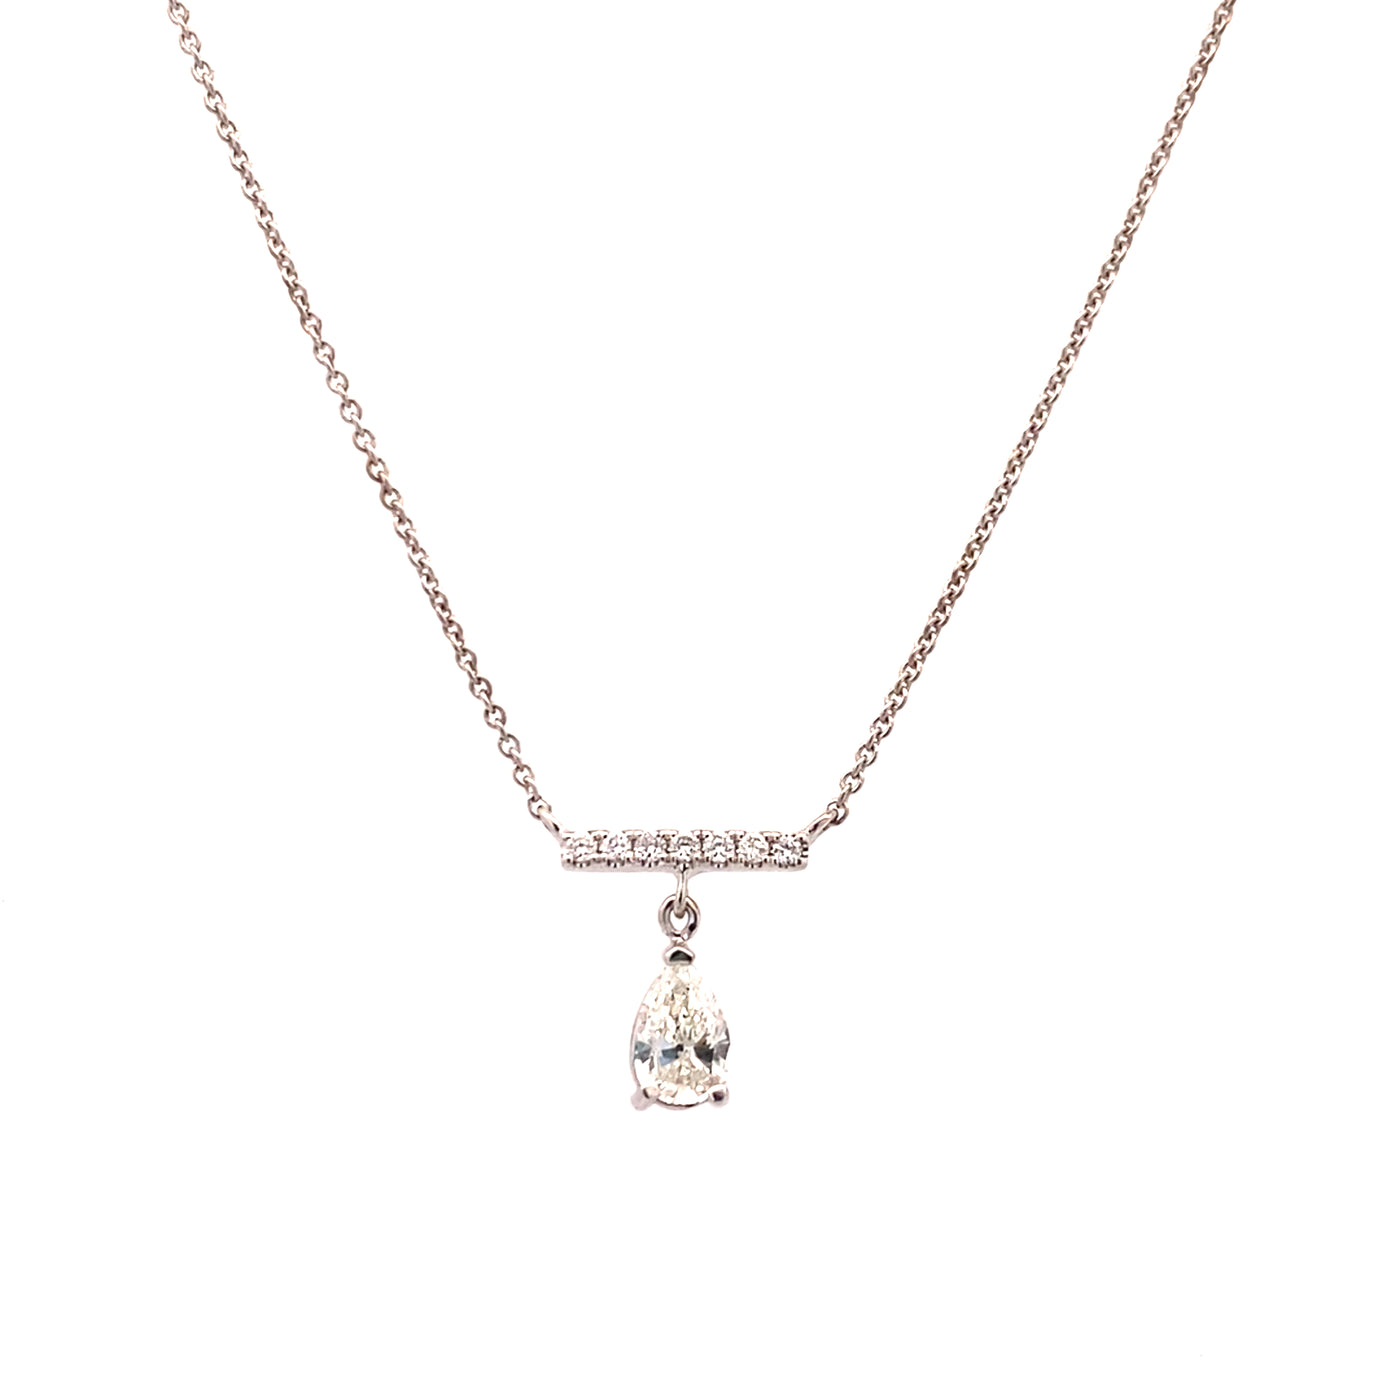 Beeghly & Co. 14 Karat Bar necklace with Drop Pear Diamond QPTNQ7231